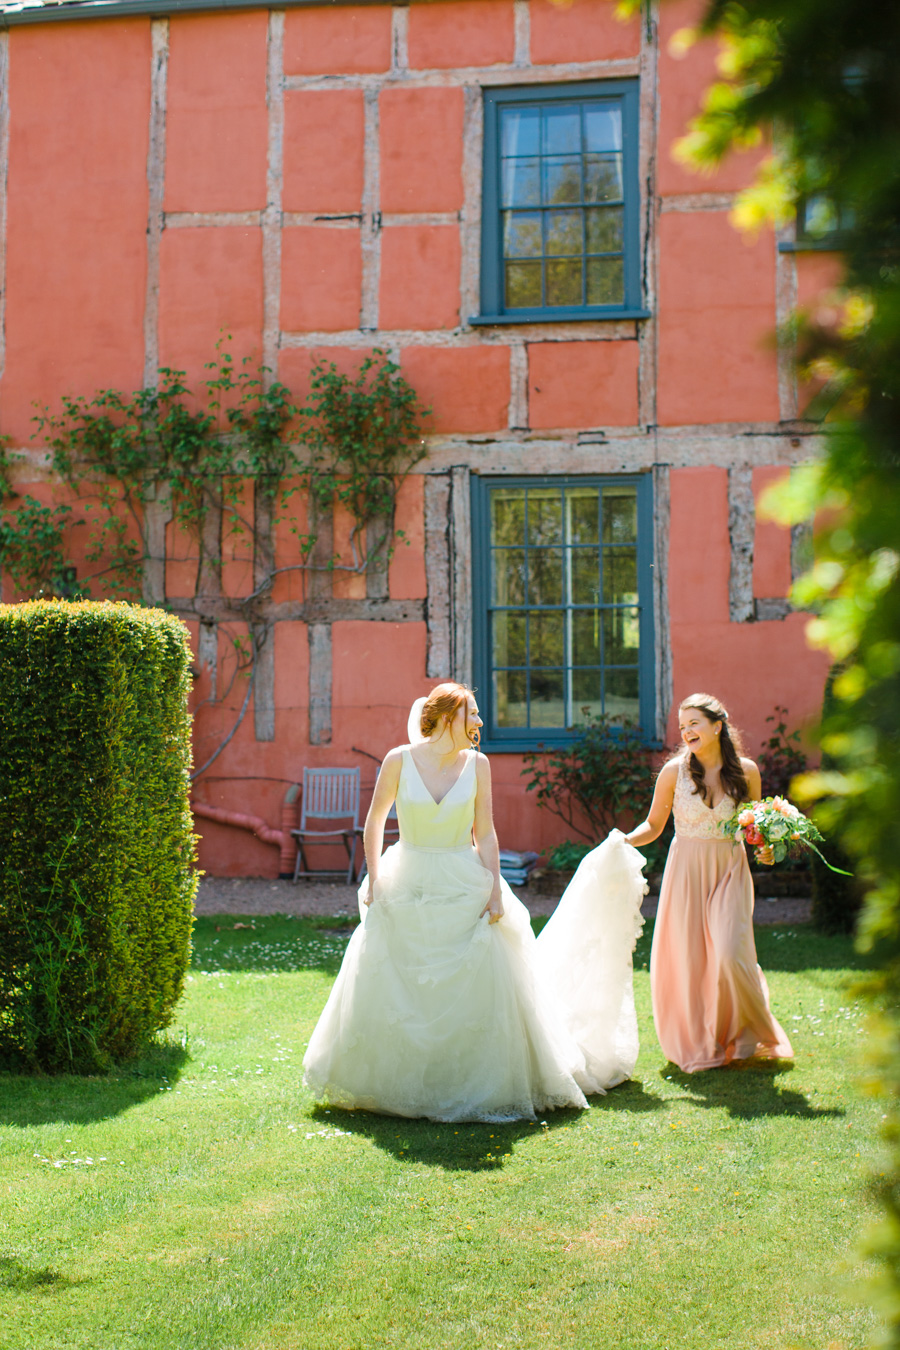 Divine wedding styling with English country garden florals at Pauntley Court, photo credit Red Maple Photography (15)